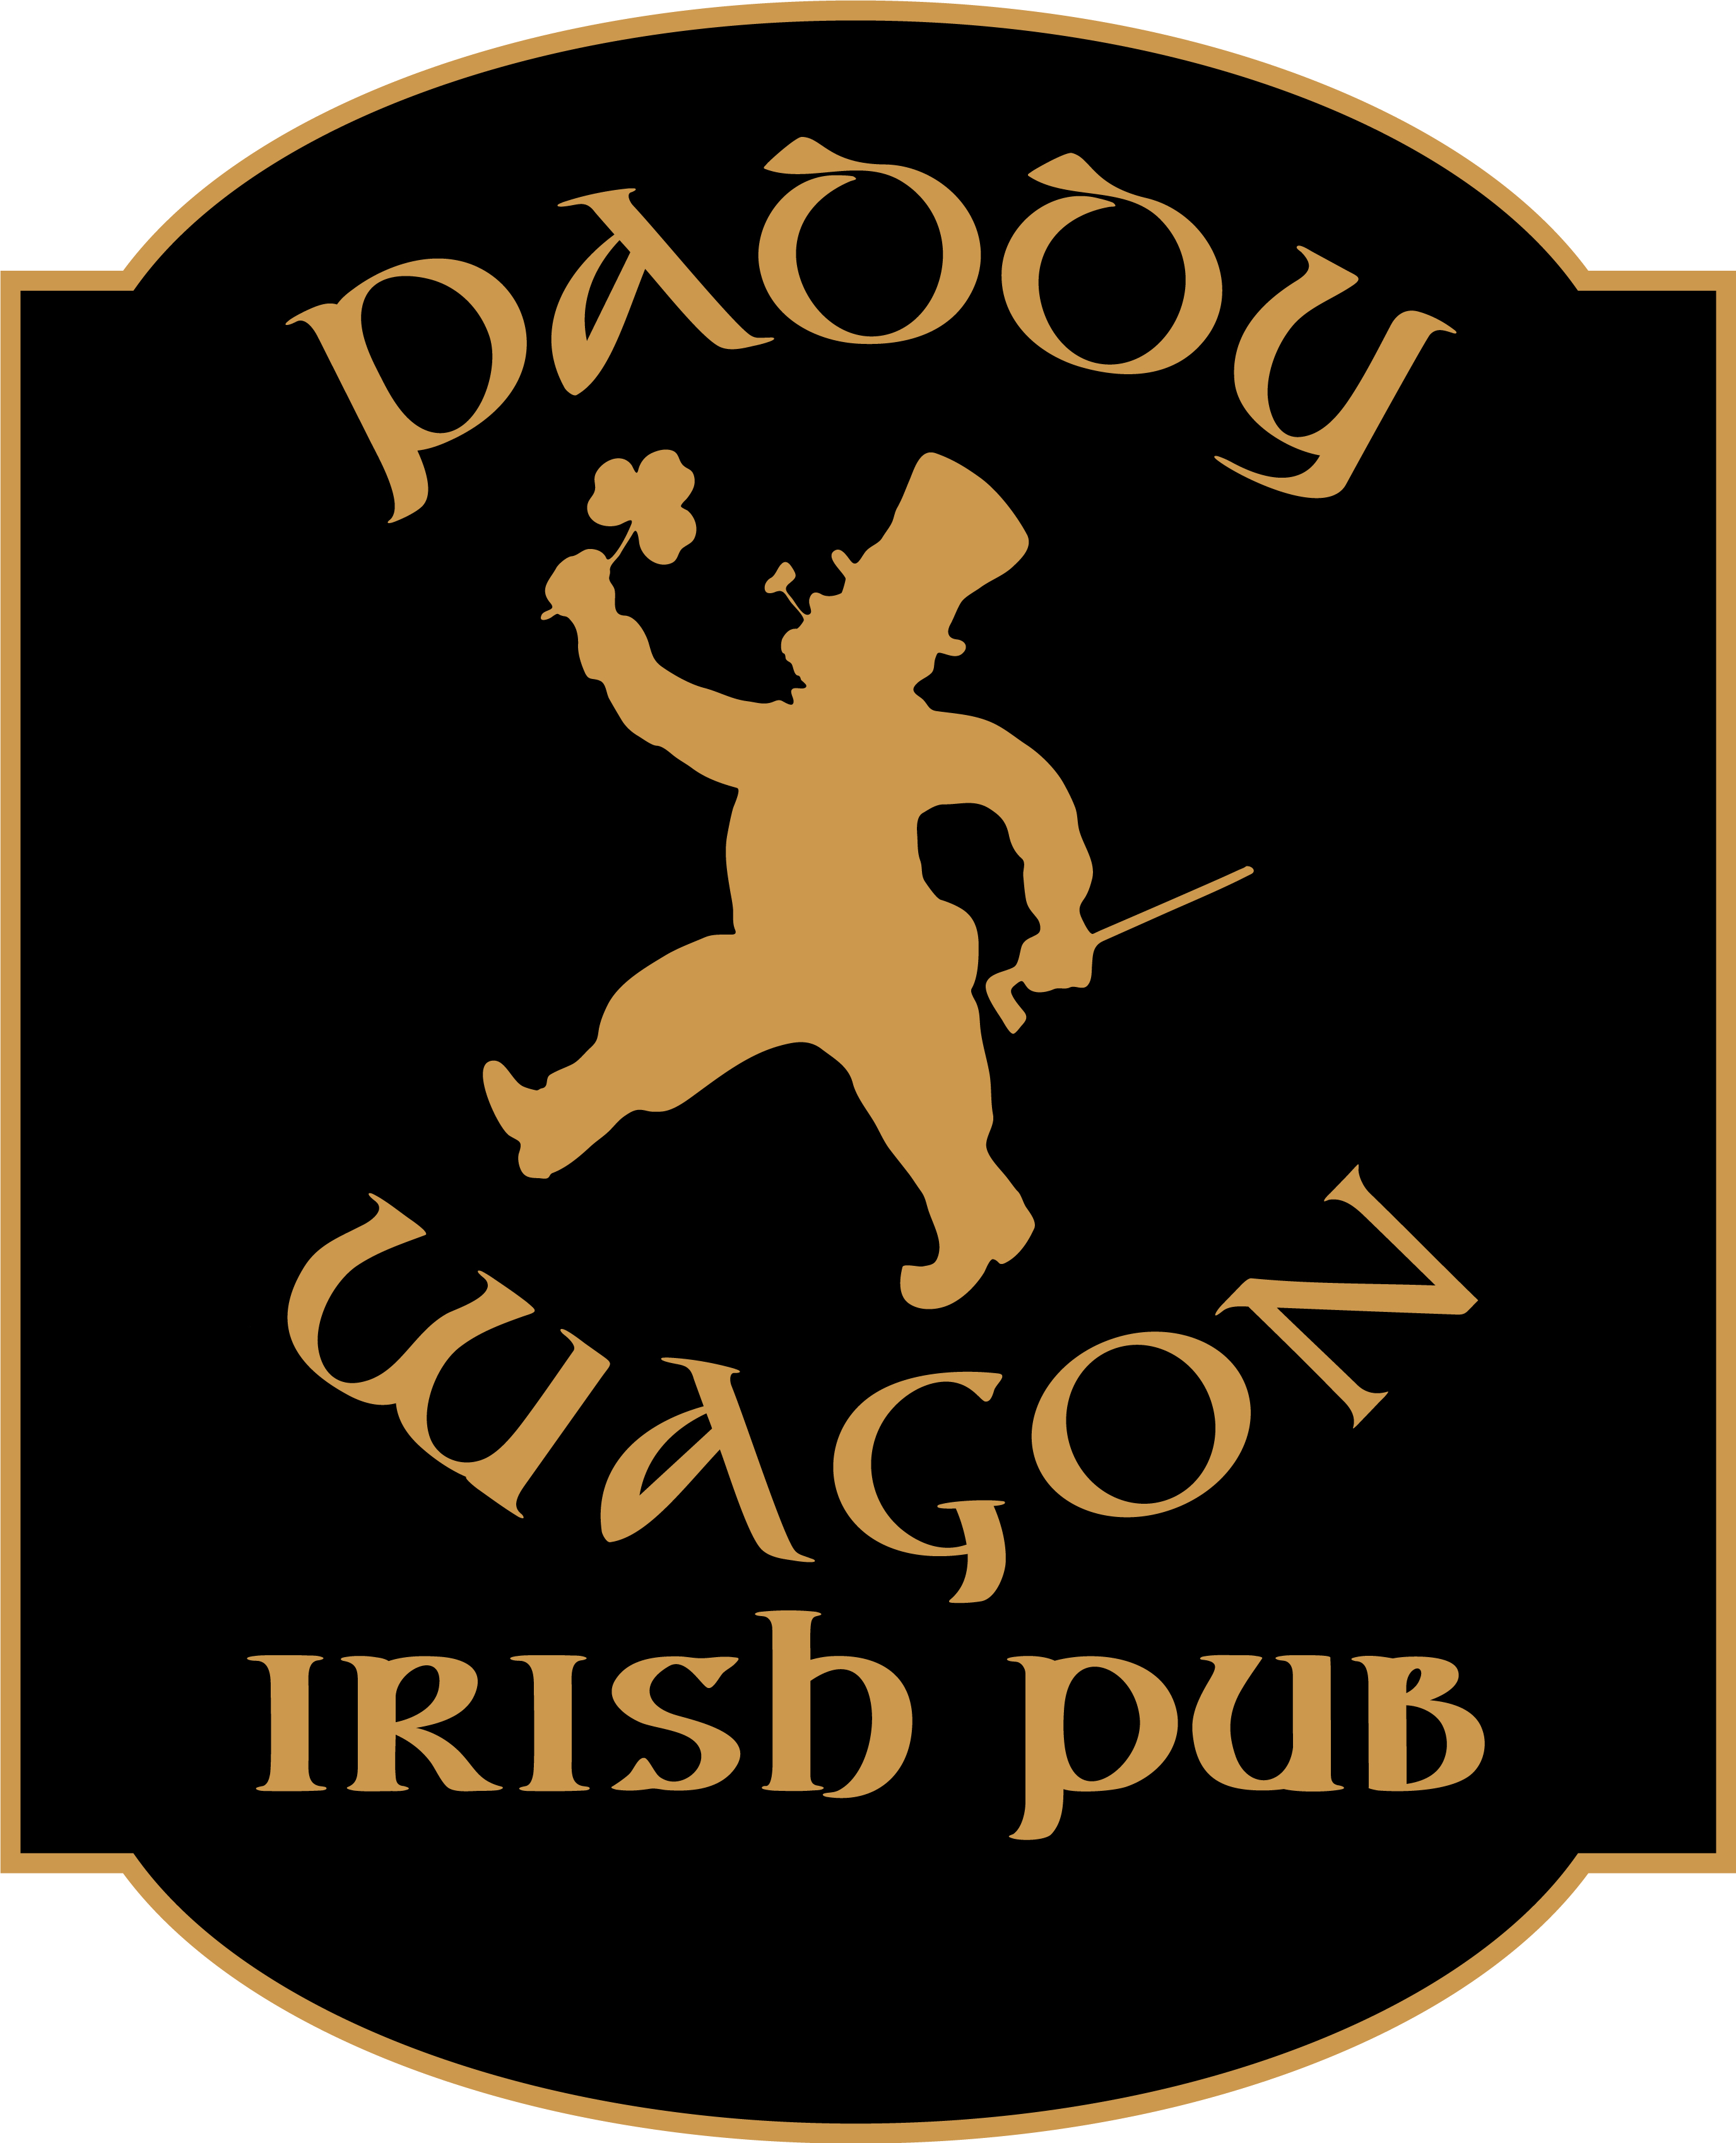 Welcome to Paddywagon - Hotel and Bistro